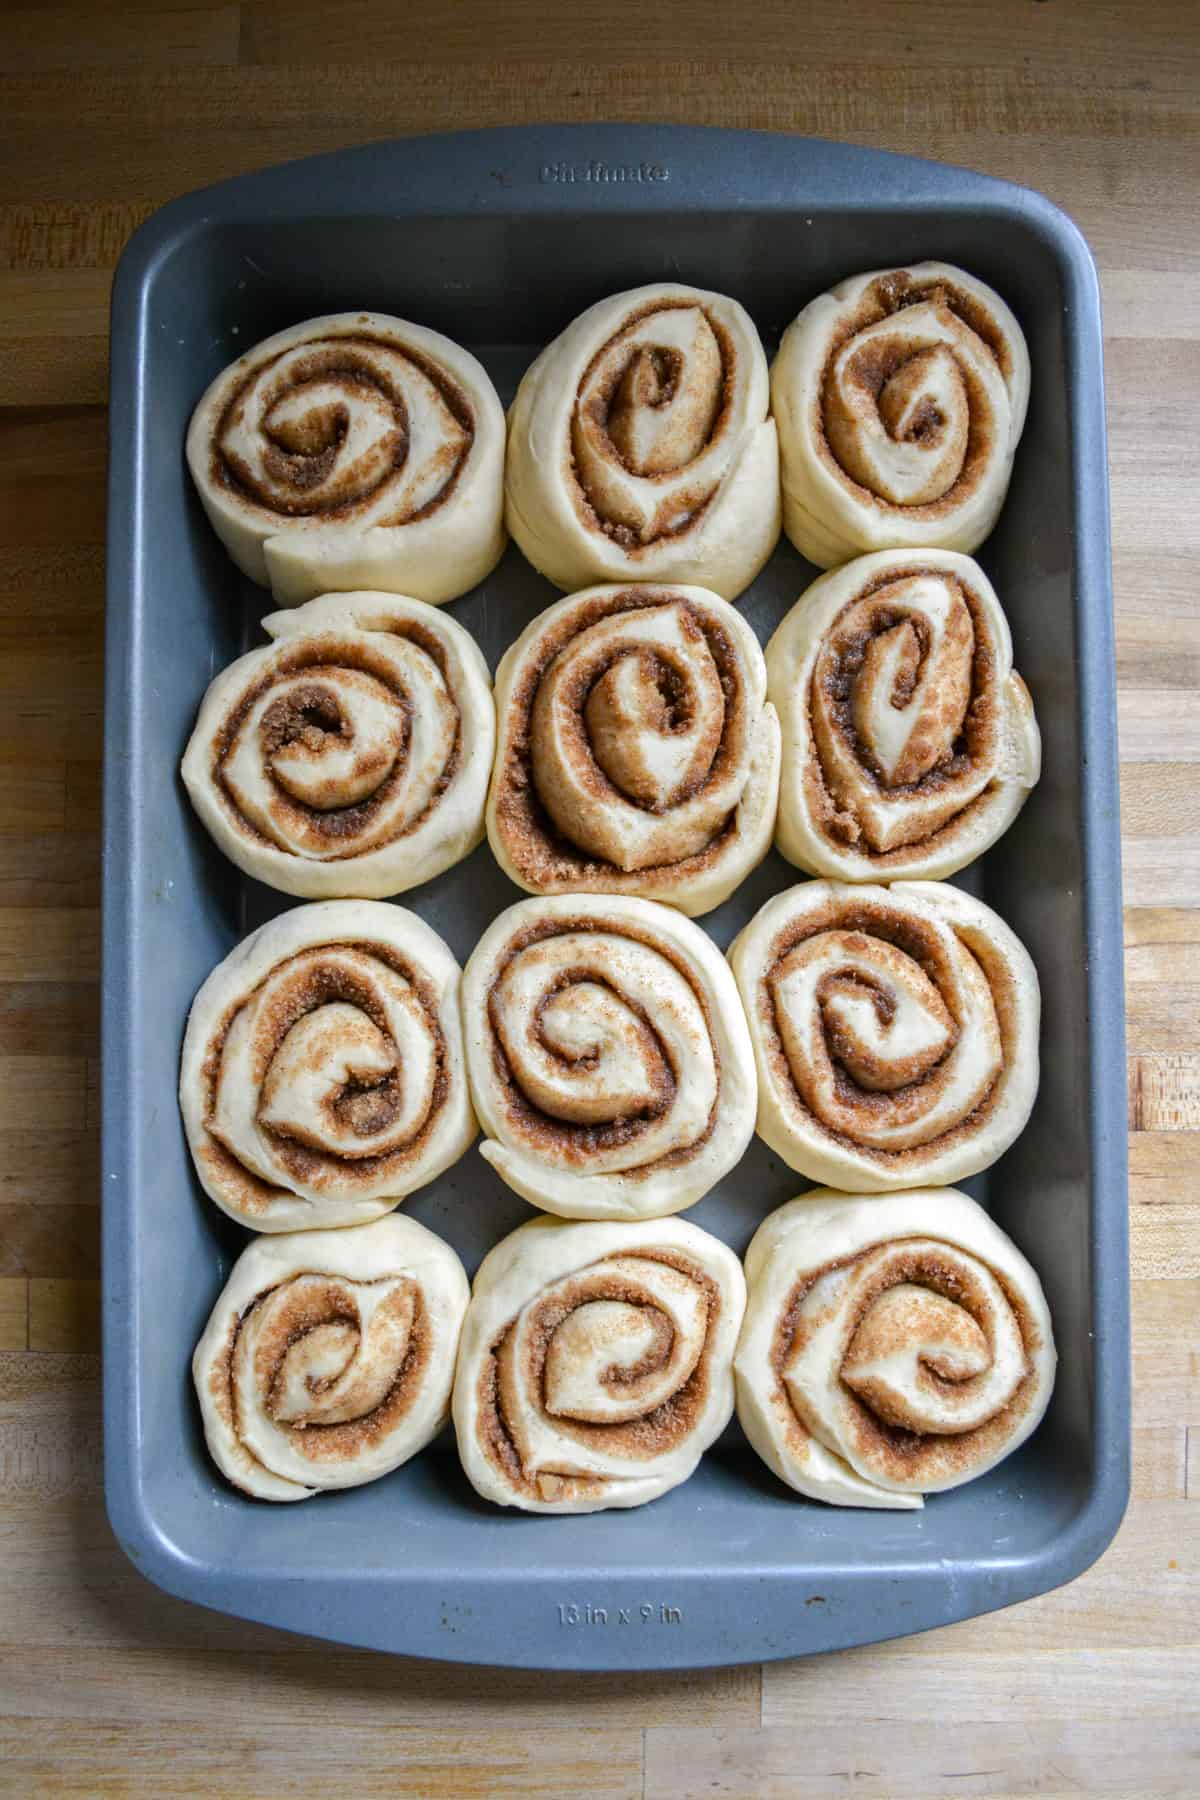 Risen cinnamon buns ready to be baked.